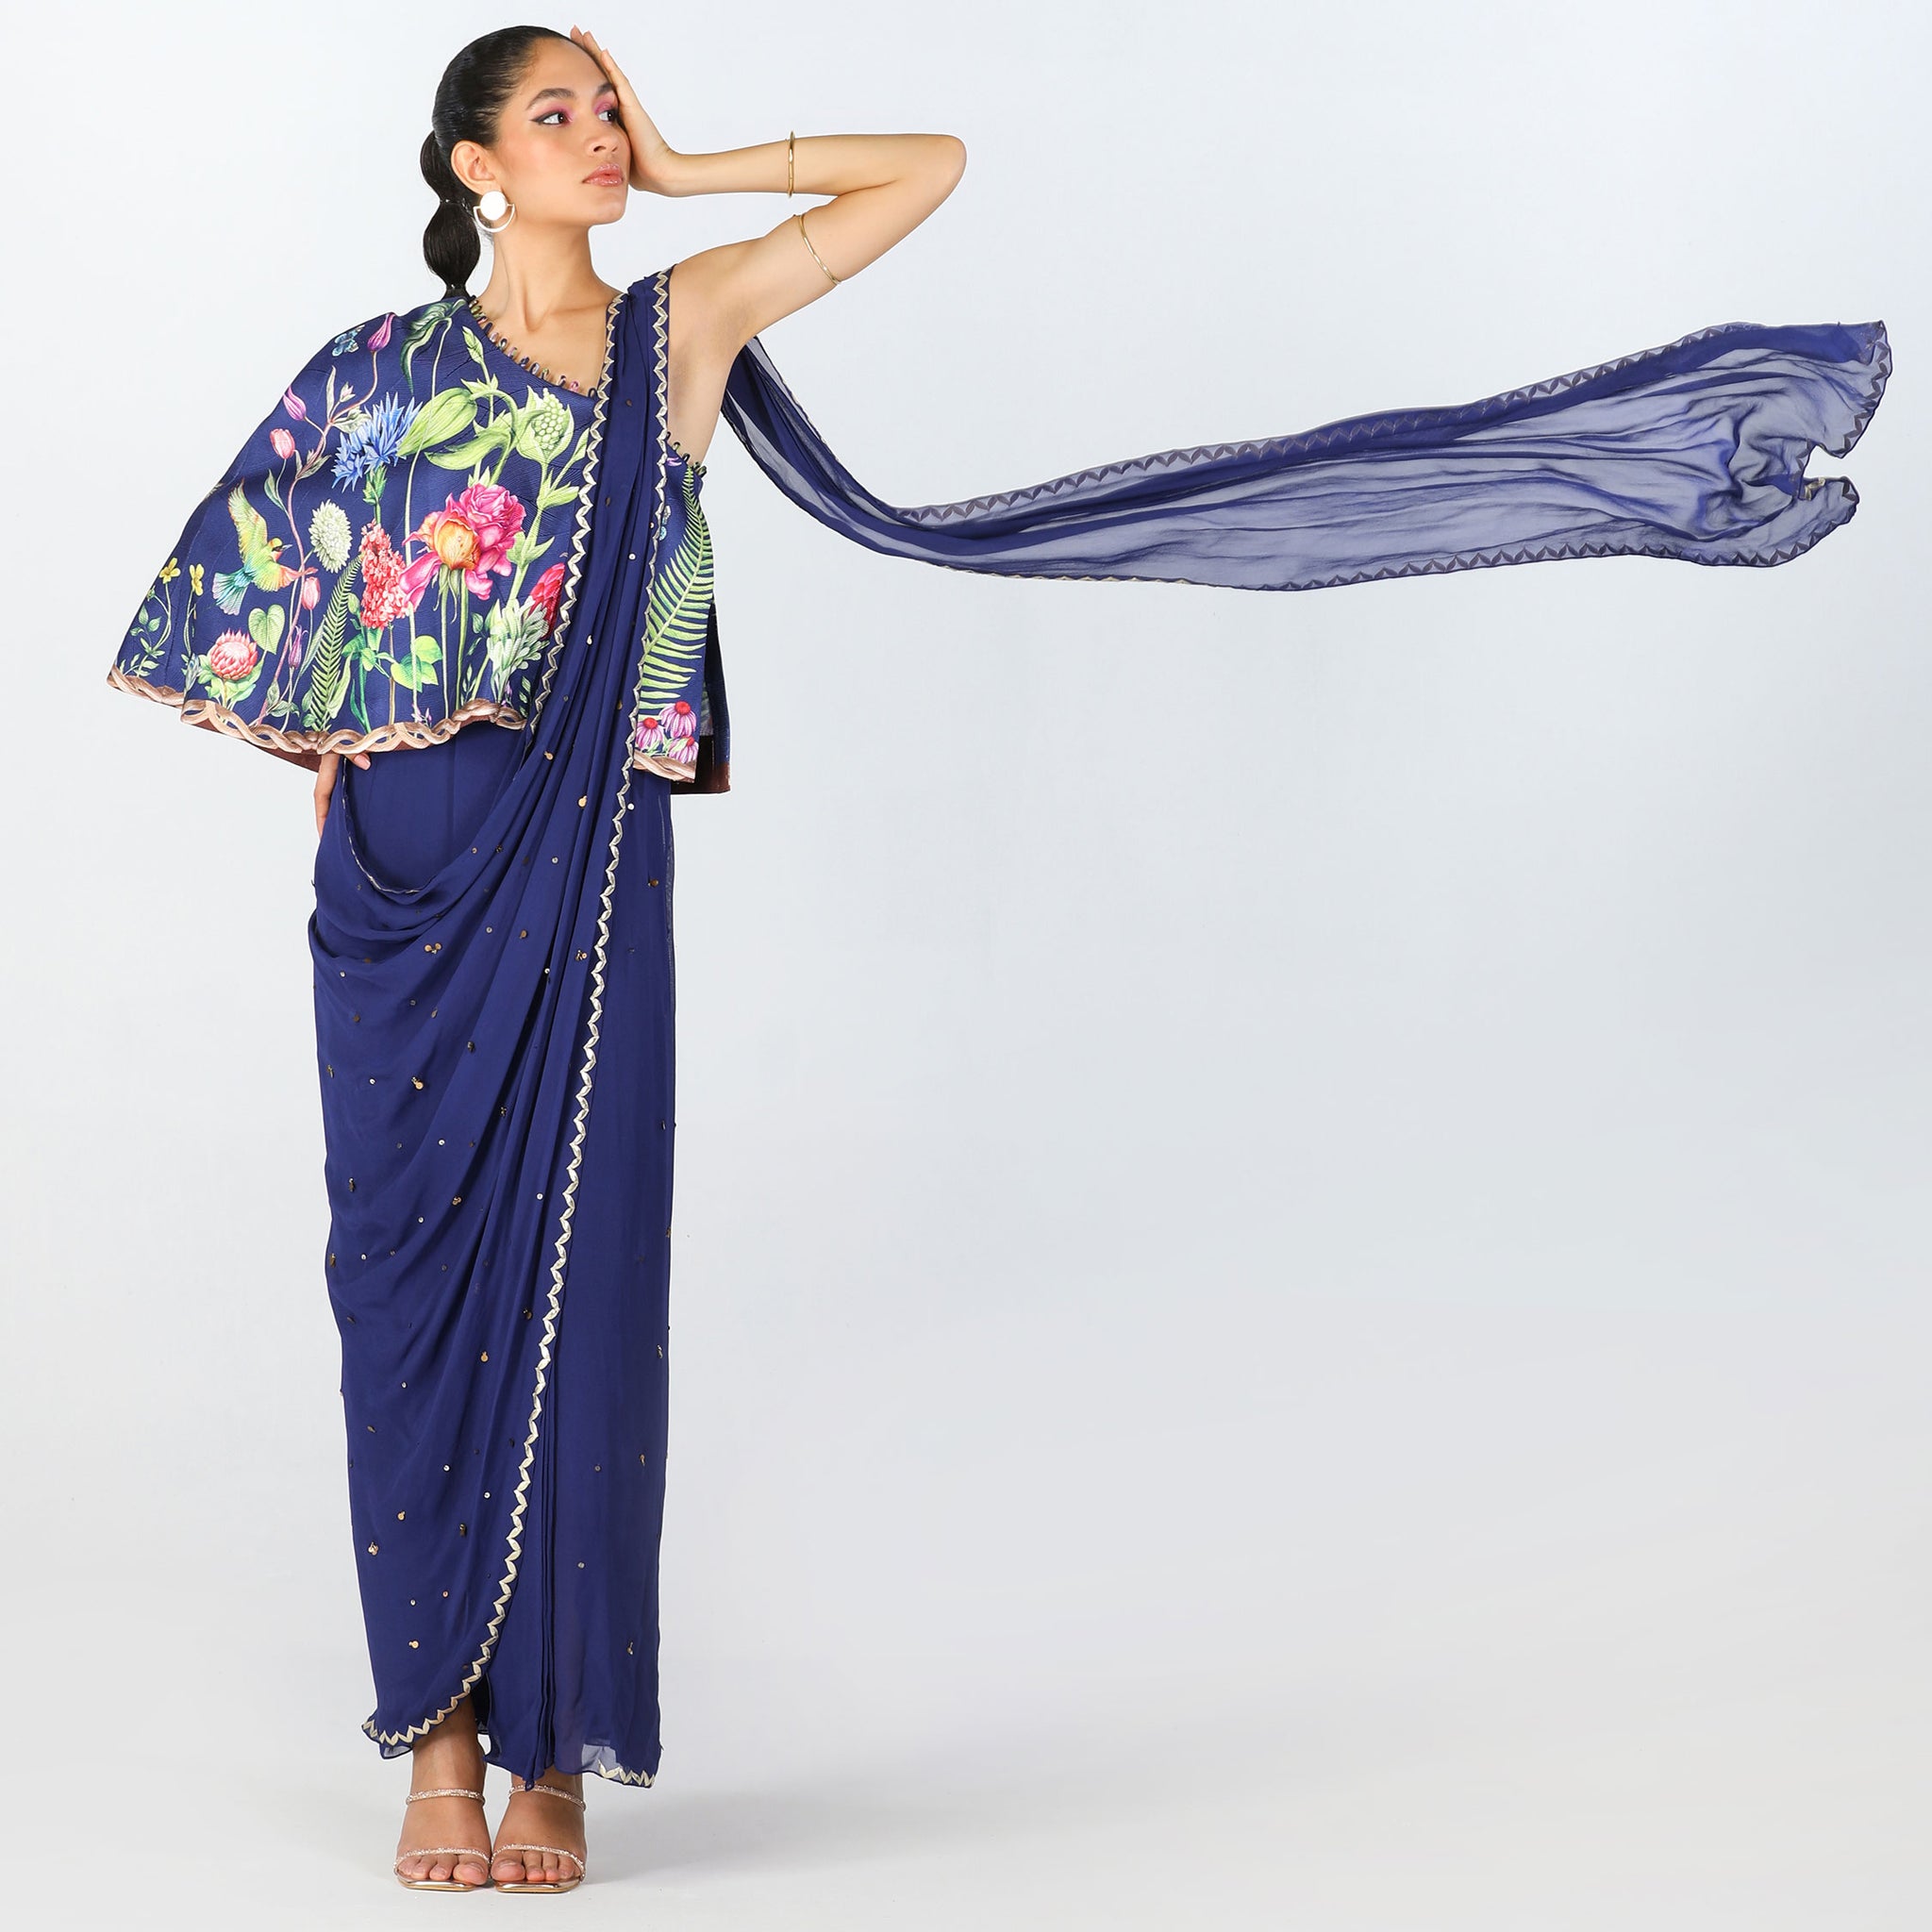 Embroidered Sari Gown